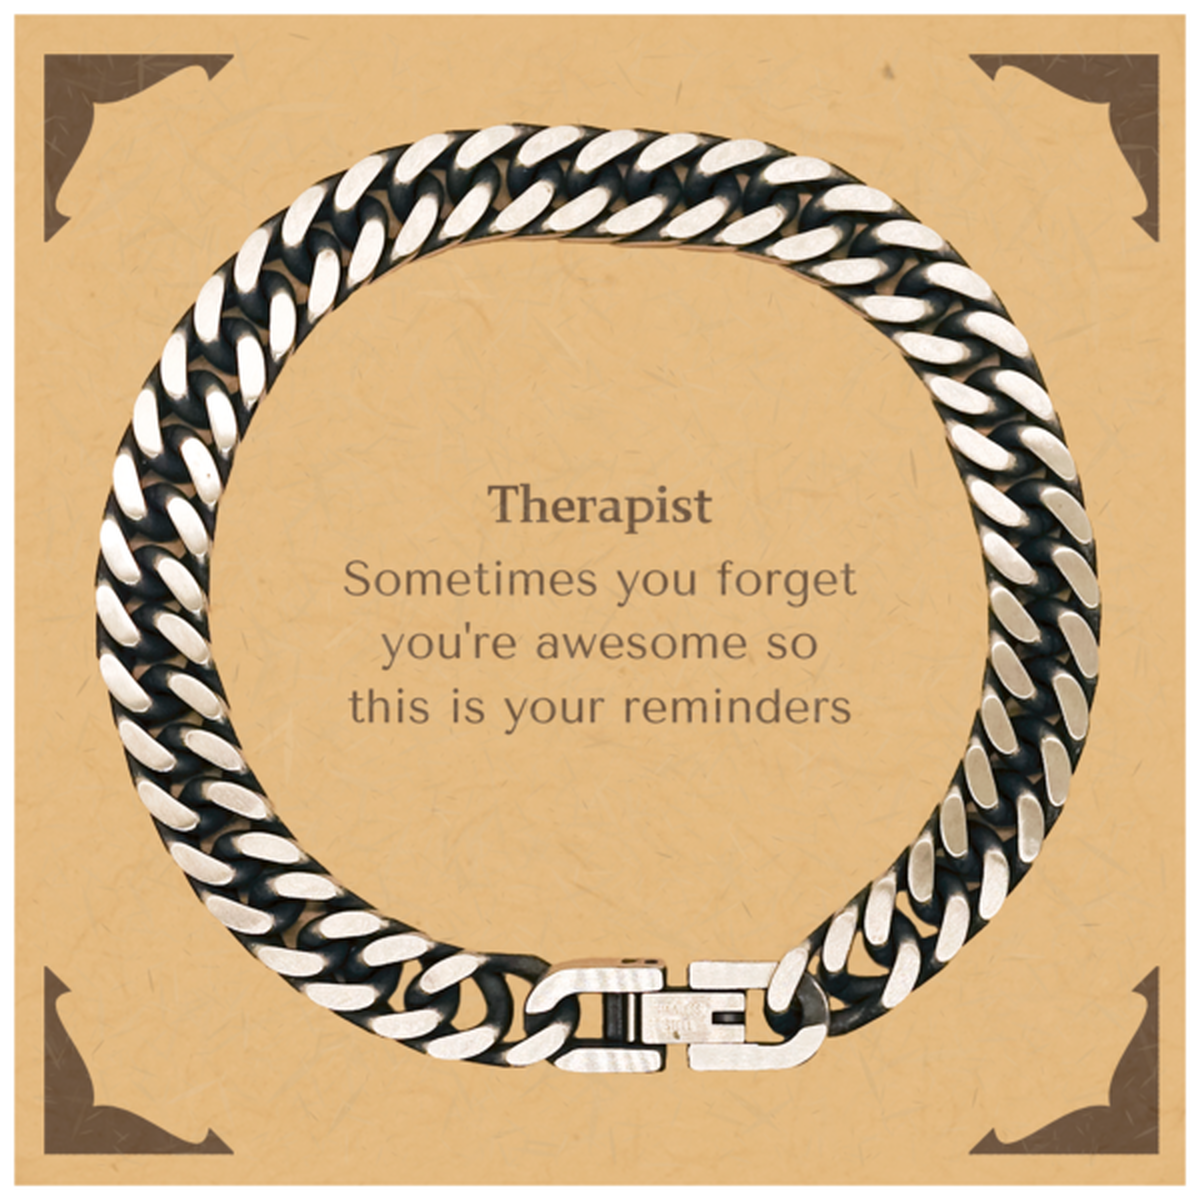 Sentimental Therapist Cuban Link Chain Bracelet, Therapist Sometimes you forget you're awesome so this is your reminders, Graduation Christmas Birthday Gifts for Therapist, Men, Women, Coworkers